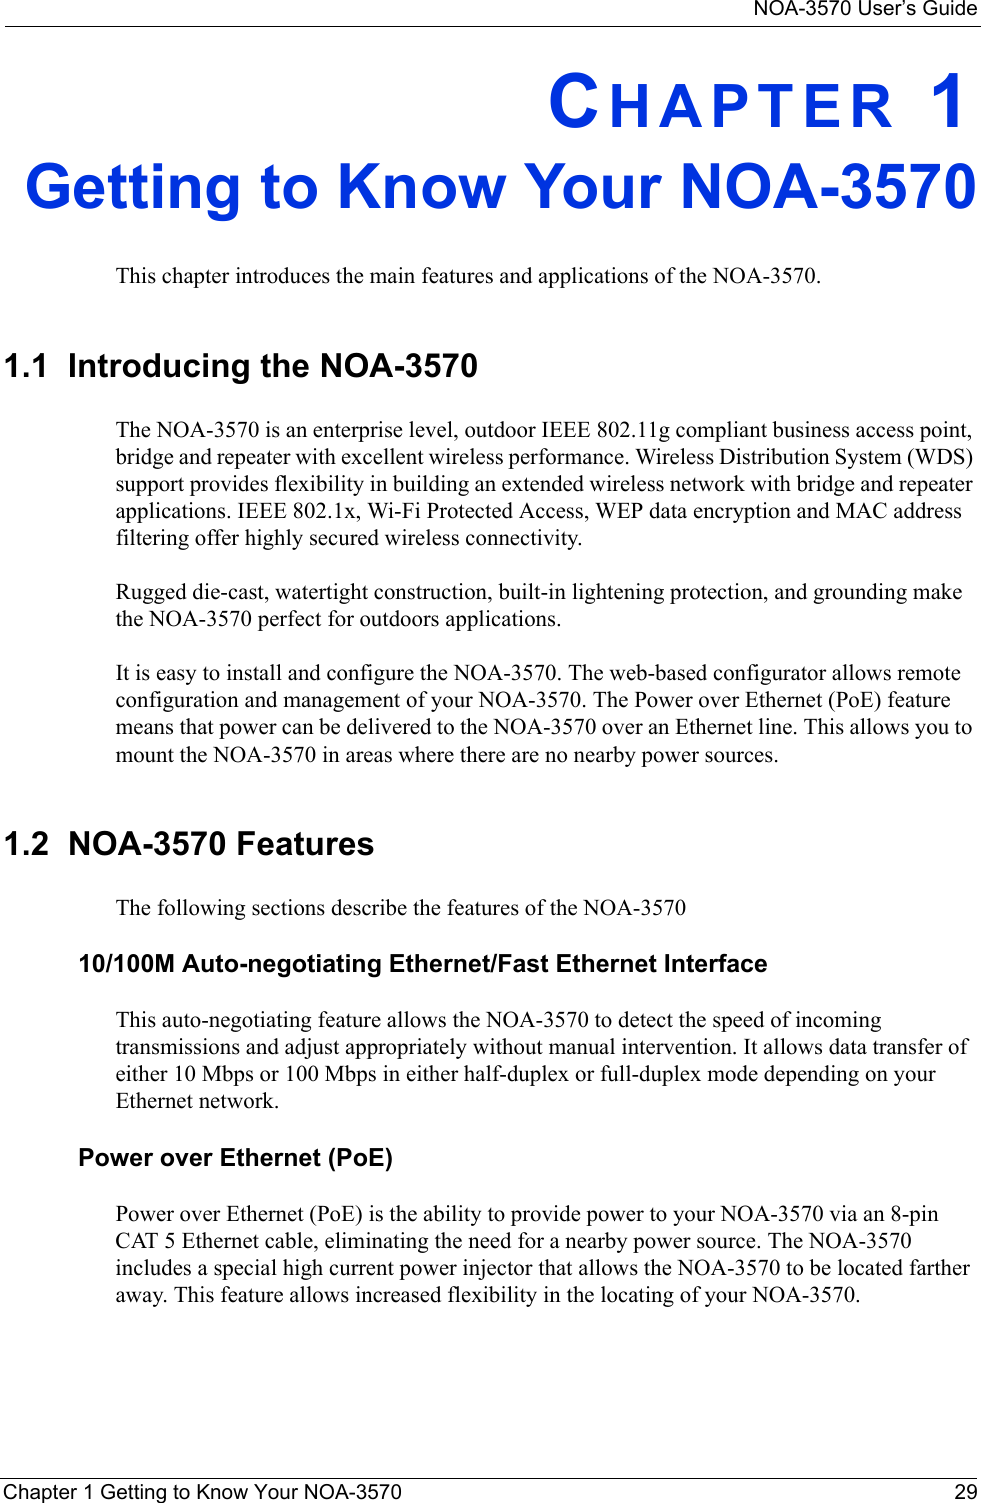 NOA-3570 User’s GuideChapter 1 Getting to Know Your NOA-3570 29CHAPTER 1Getting to Know Your NOA-3570This chapter introduces the main features and applications of the NOA-3570.1.1  Introducing the NOA-3570 The NOA-3570 is an enterprise level, outdoor IEEE 802.11g compliant business access point, bridge and repeater with excellent wireless performance. Wireless Distribution System (WDS) support provides flexibility in building an extended wireless network with bridge and repeater applications. IEEE 802.1x, Wi-Fi Protected Access, WEP data encryption and MAC address filtering offer highly secured wireless connectivity. Rugged die-cast, watertight construction, built-in lightening protection, and grounding make the NOA-3570 perfect for outdoors applications. It is easy to install and configure the NOA-3570. The web-based configurator allows remote configuration and management of your NOA-3570. The Power over Ethernet (PoE) feature means that power can be delivered to the NOA-3570 over an Ethernet line. This allows you to mount the NOA-3570 in areas where there are no nearby power sources.1.2  NOA-3570 FeaturesThe following sections describe the features of the NOA-3570 10/100M Auto-negotiating Ethernet/Fast Ethernet InterfaceThis auto-negotiating feature allows the NOA-3570 to detect the speed of incoming transmissions and adjust appropriately without manual intervention. It allows data transfer of either 10 Mbps or 100 Mbps in either half-duplex or full-duplex mode depending on your Ethernet network.Power over Ethernet (PoE) Power over Ethernet (PoE) is the ability to provide power to your NOA-3570 via an 8-pin CAT 5 Ethernet cable, eliminating the need for a nearby power source. The NOA-3570 includes a special high current power injector that allows the NOA-3570 to be located farther away. This feature allows increased flexibility in the locating of your NOA-3570.